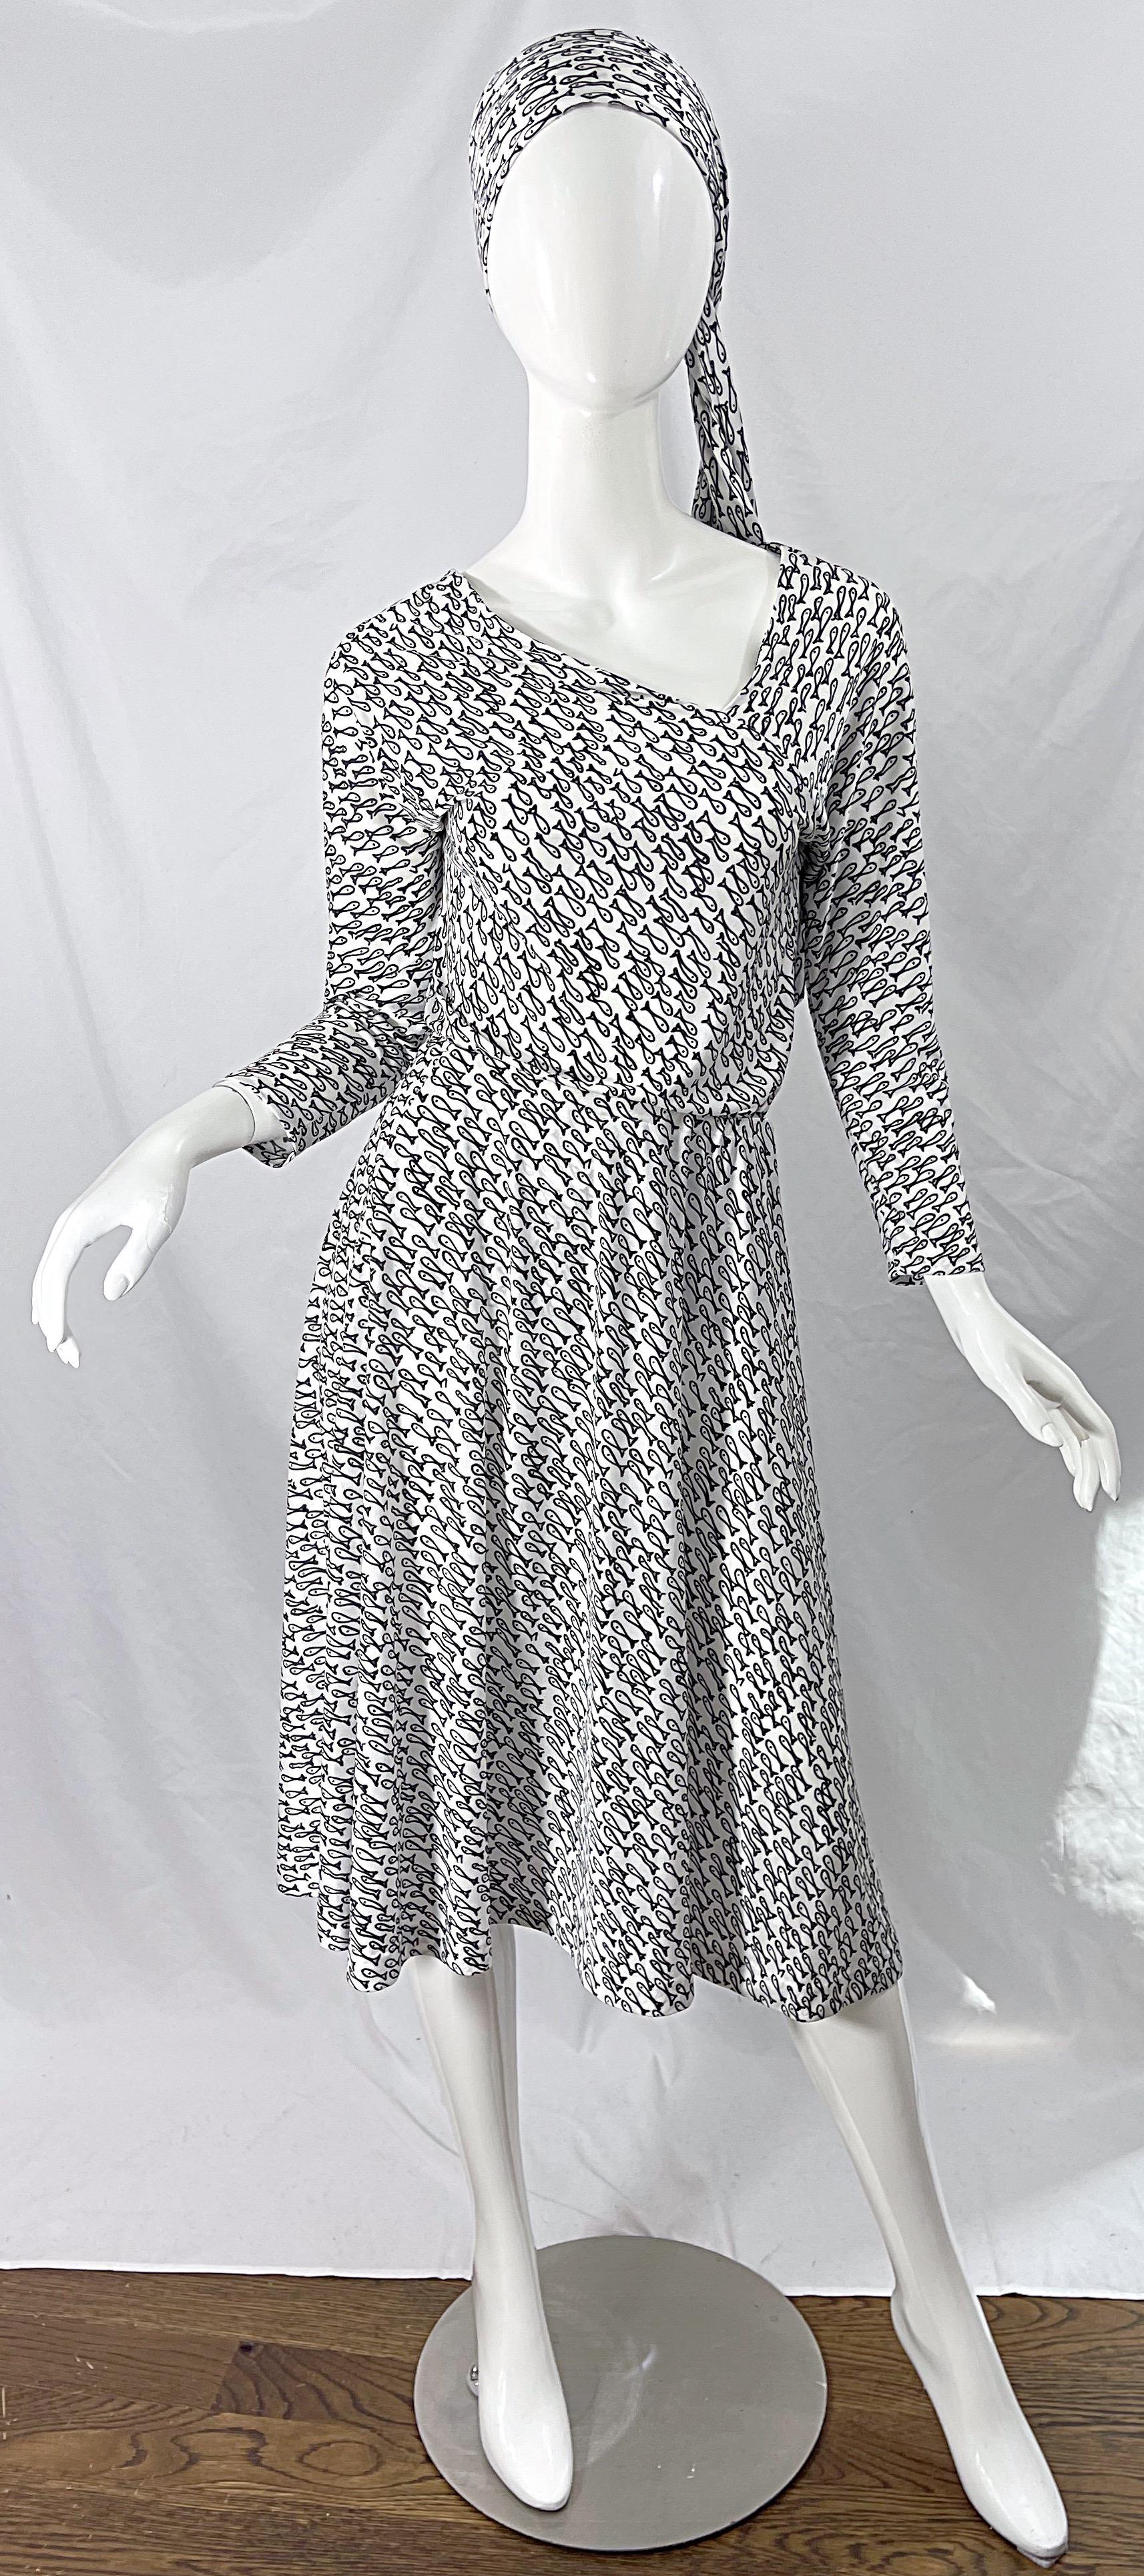 Rare HALSTON IV 1970s black and white novelty fish print three piece jersey ensemble ! Top features an asymmetrical neckline on the front and back. Skirt is a flirty easy fit with an elastic waistband. Sash can be used as a belt or head scarf. All 3